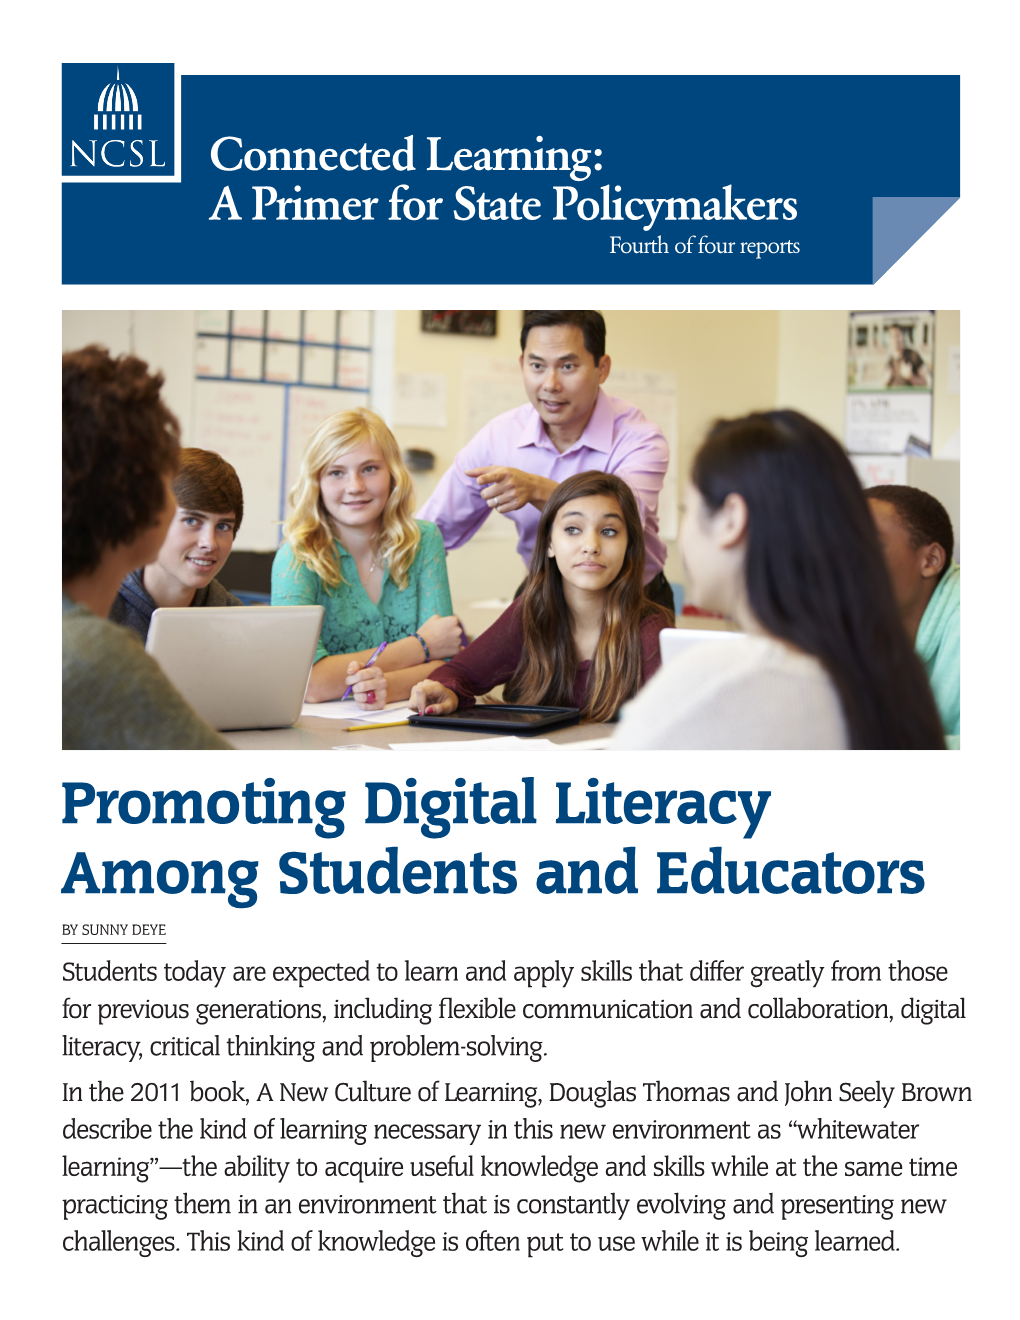 Promoting Digital Literacy Among Students and Educators